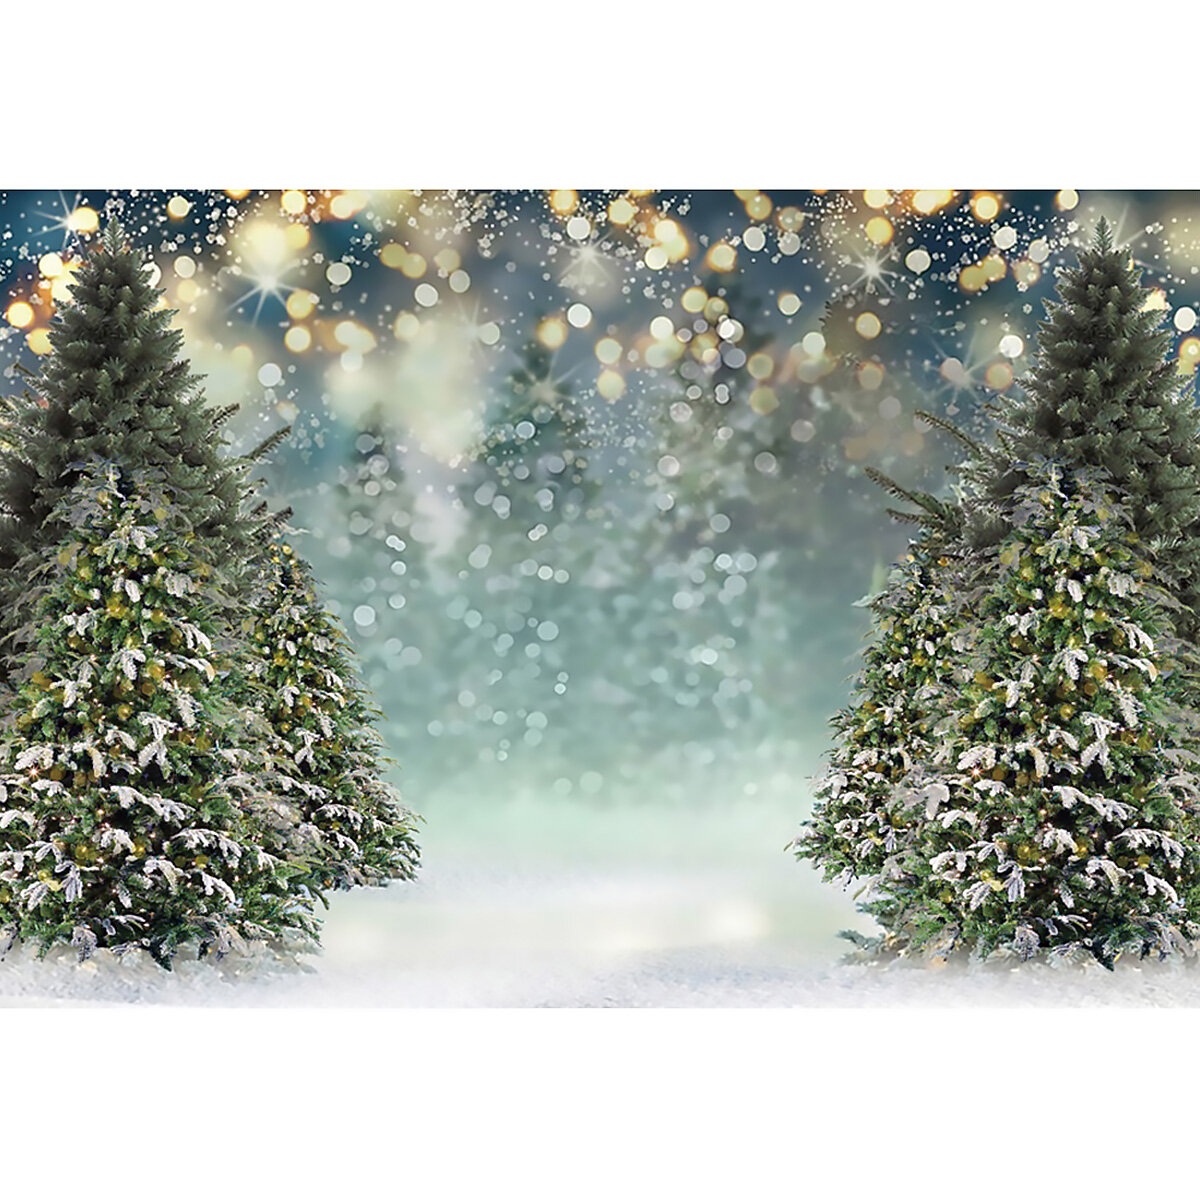 0.9x1.5m 1.5x2.1m 1.8x2.7m Winter Snowflake Christmas Tree Photography Backdrops Glitter Decoration Background Cloth for